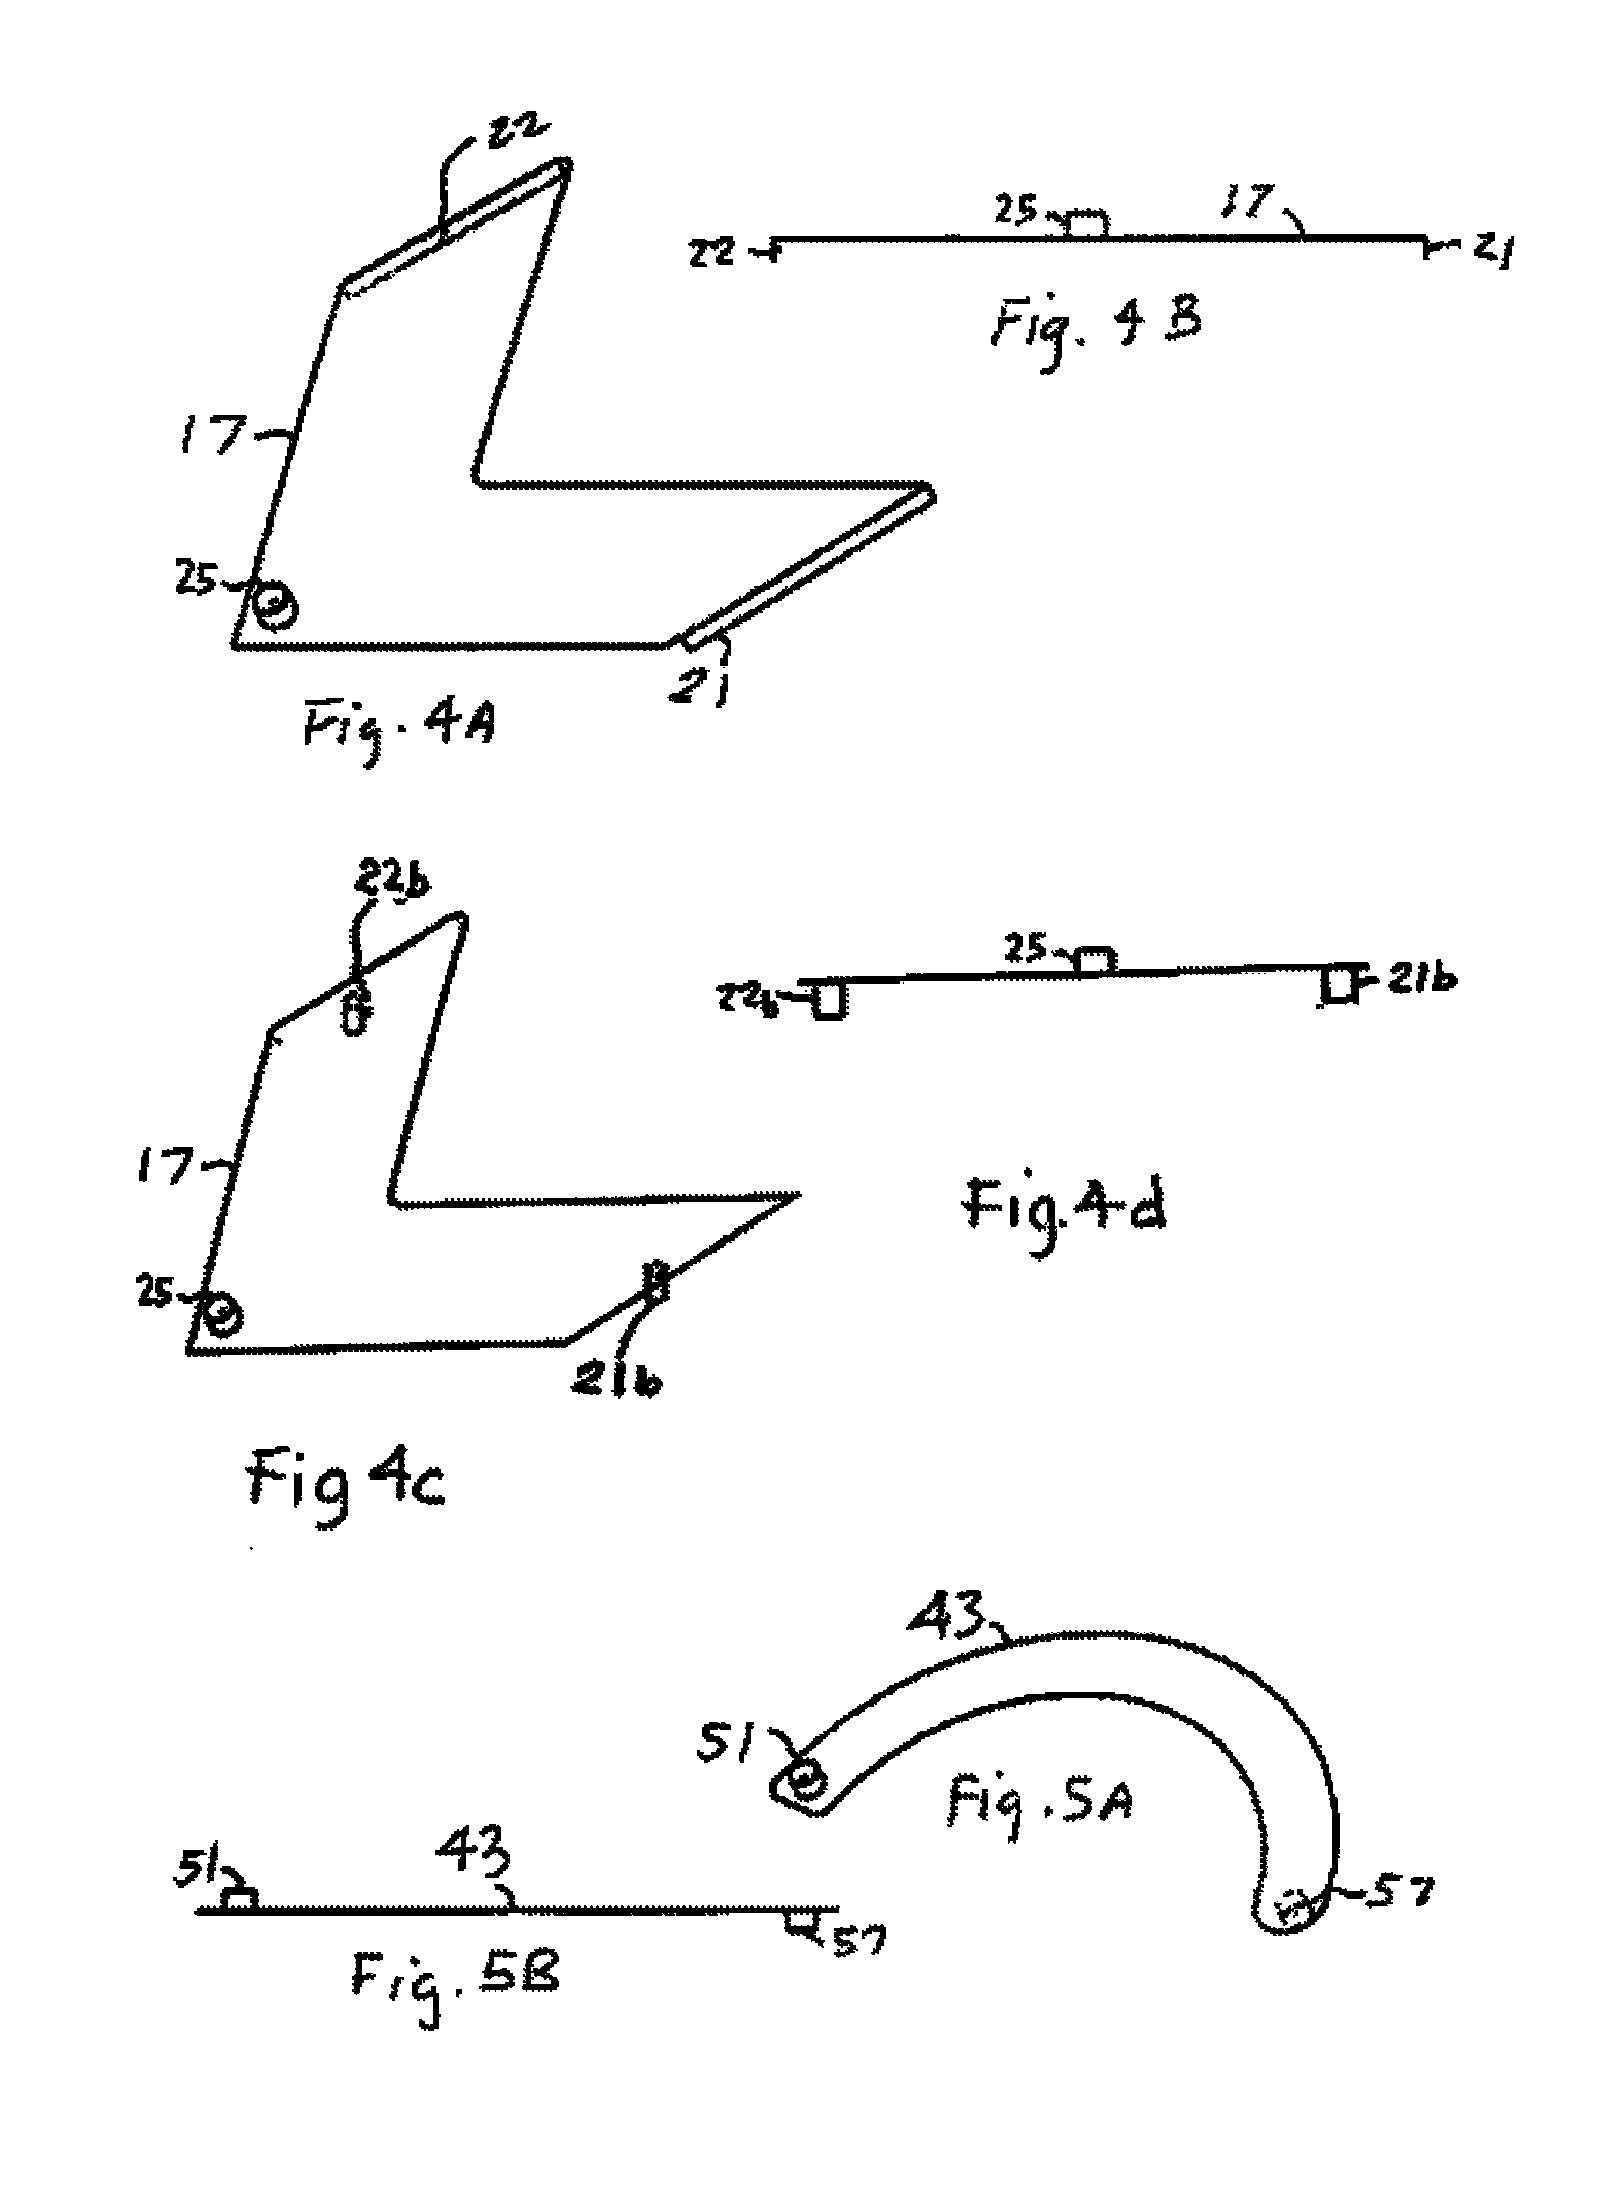 Continuous variable aperture for forward looking infrared cameras based on adjustable blades